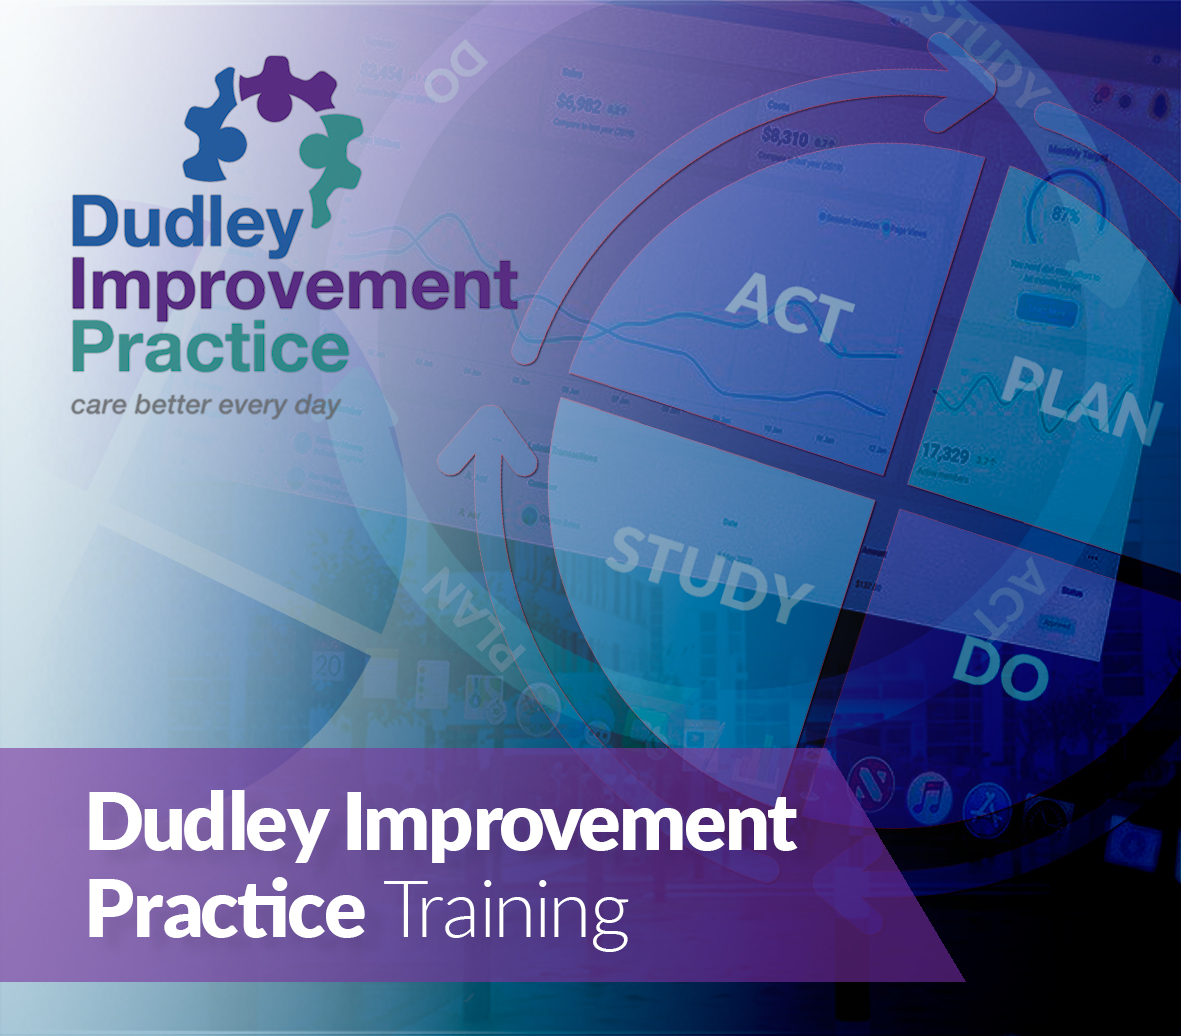 A graphic showing the Dudley Improvement Practice training marketing advert